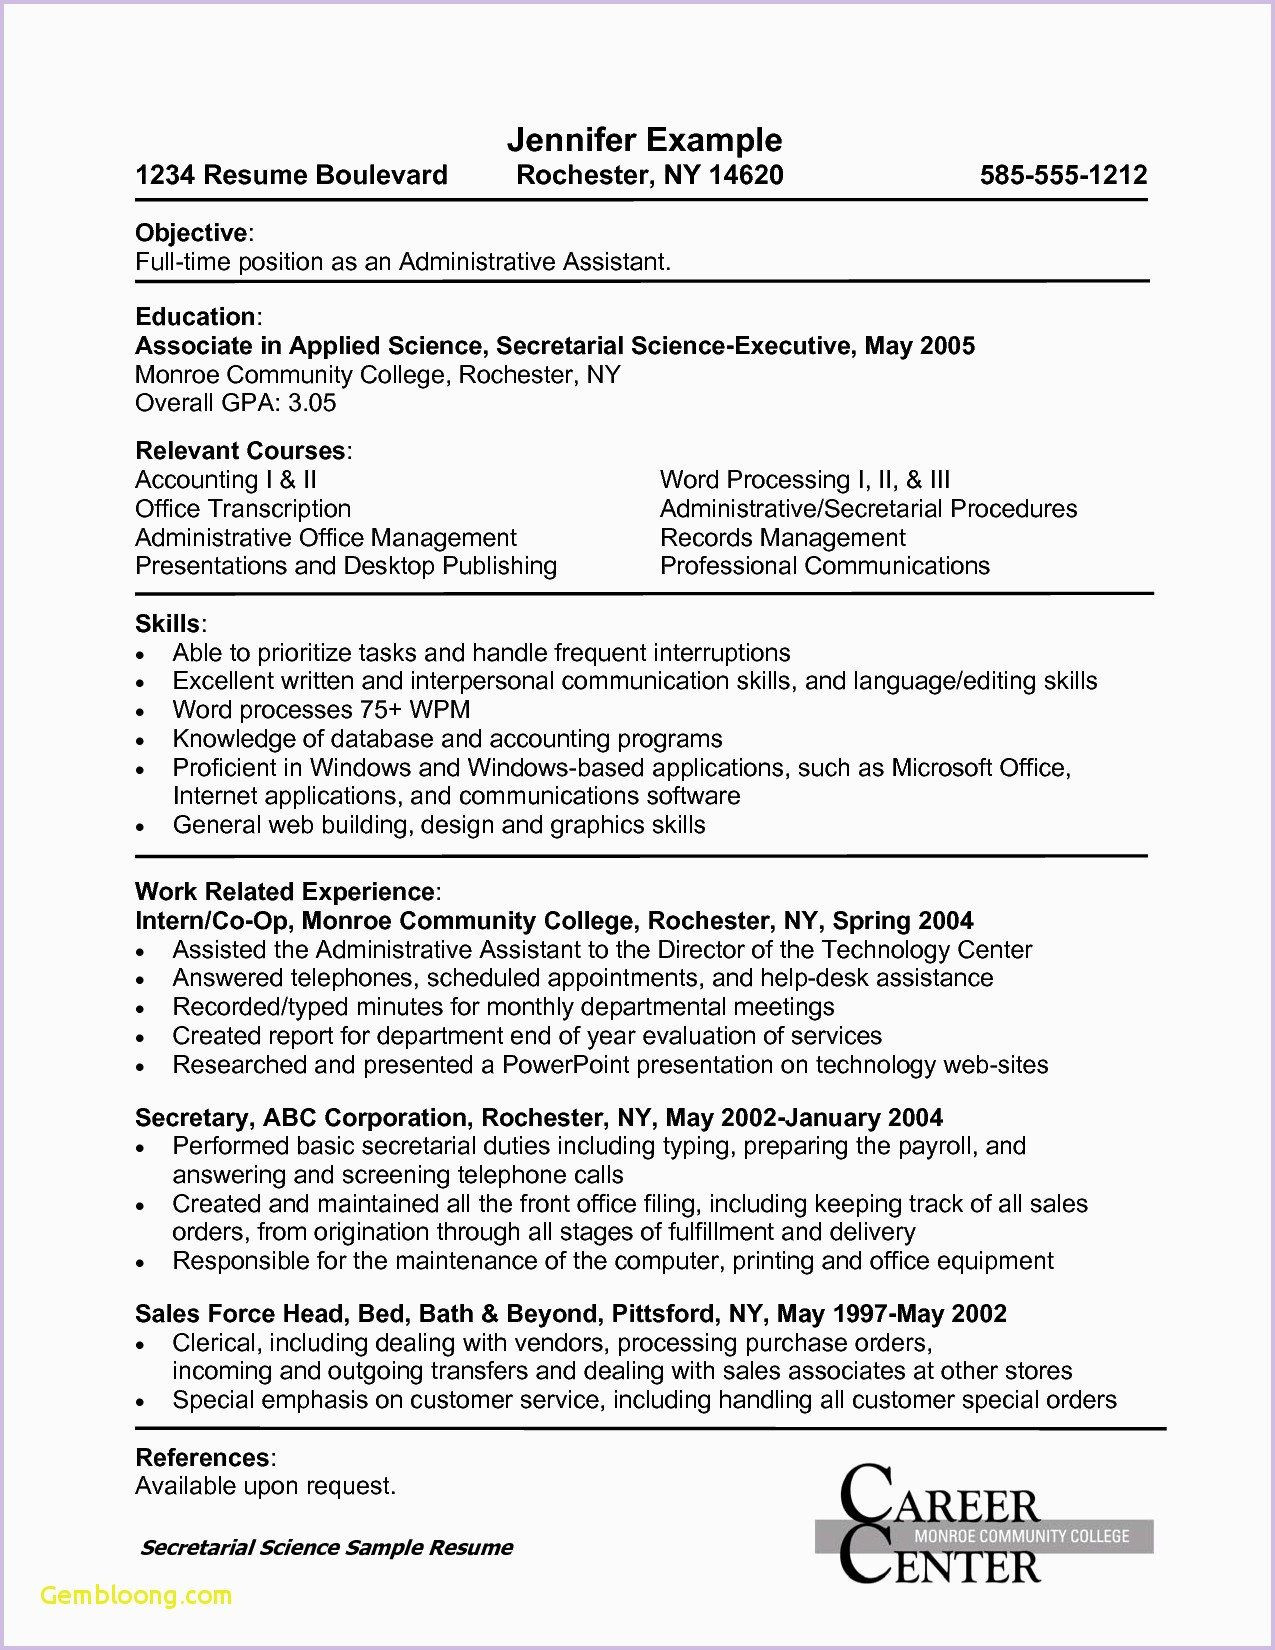 Resume Objective Samples for Administrative assistant Office assistant Resume Examples Administrative assistant Resume …